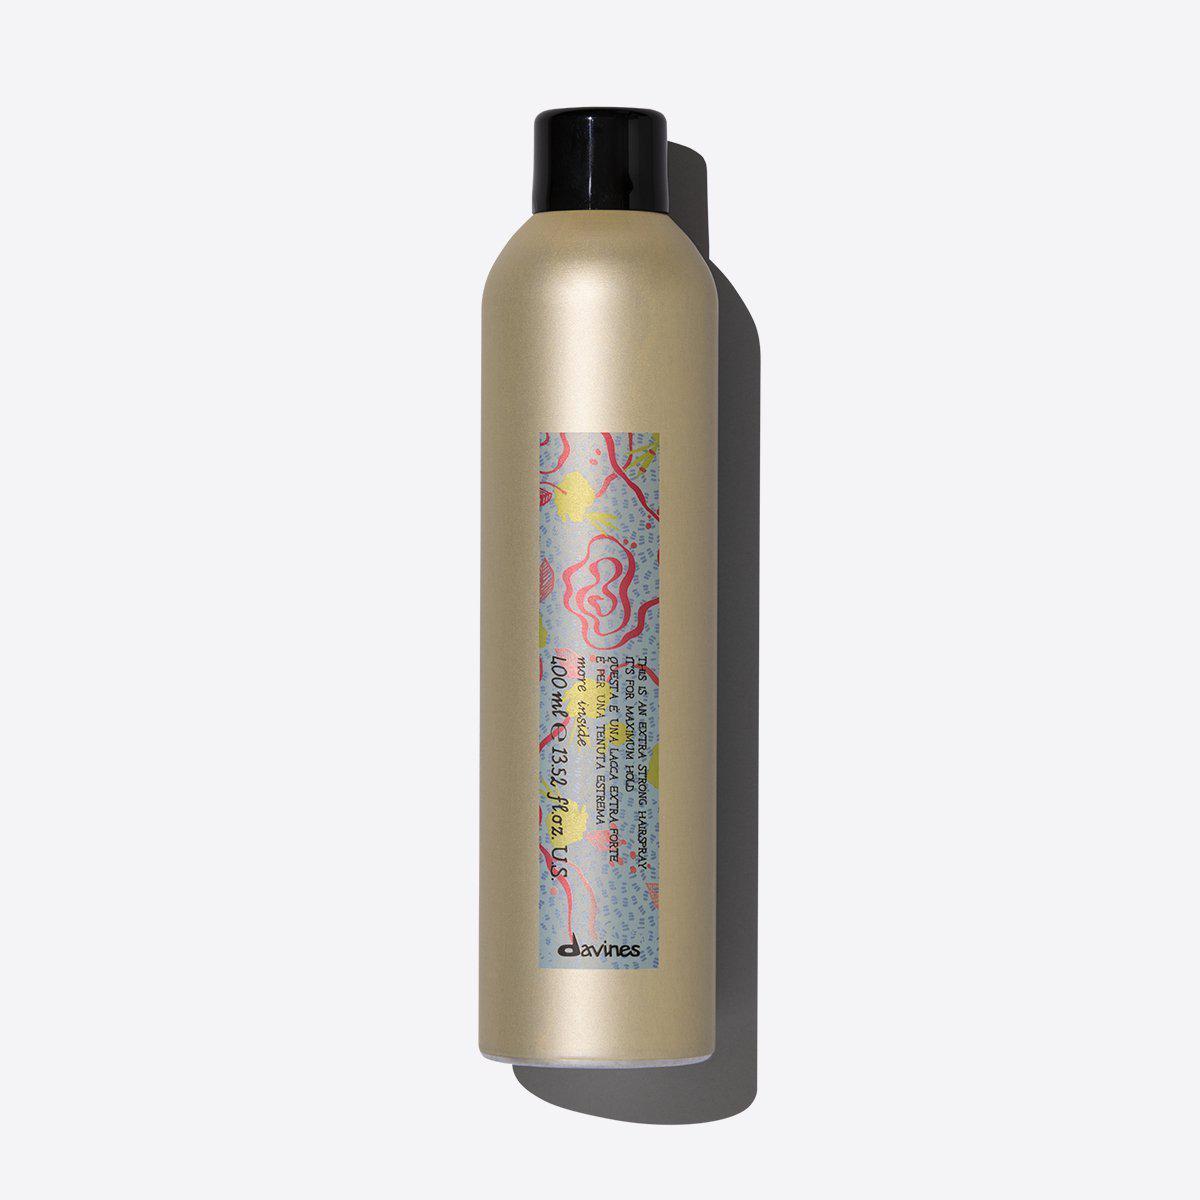 Davines This Is an Extra Strong Hairspray 400ml